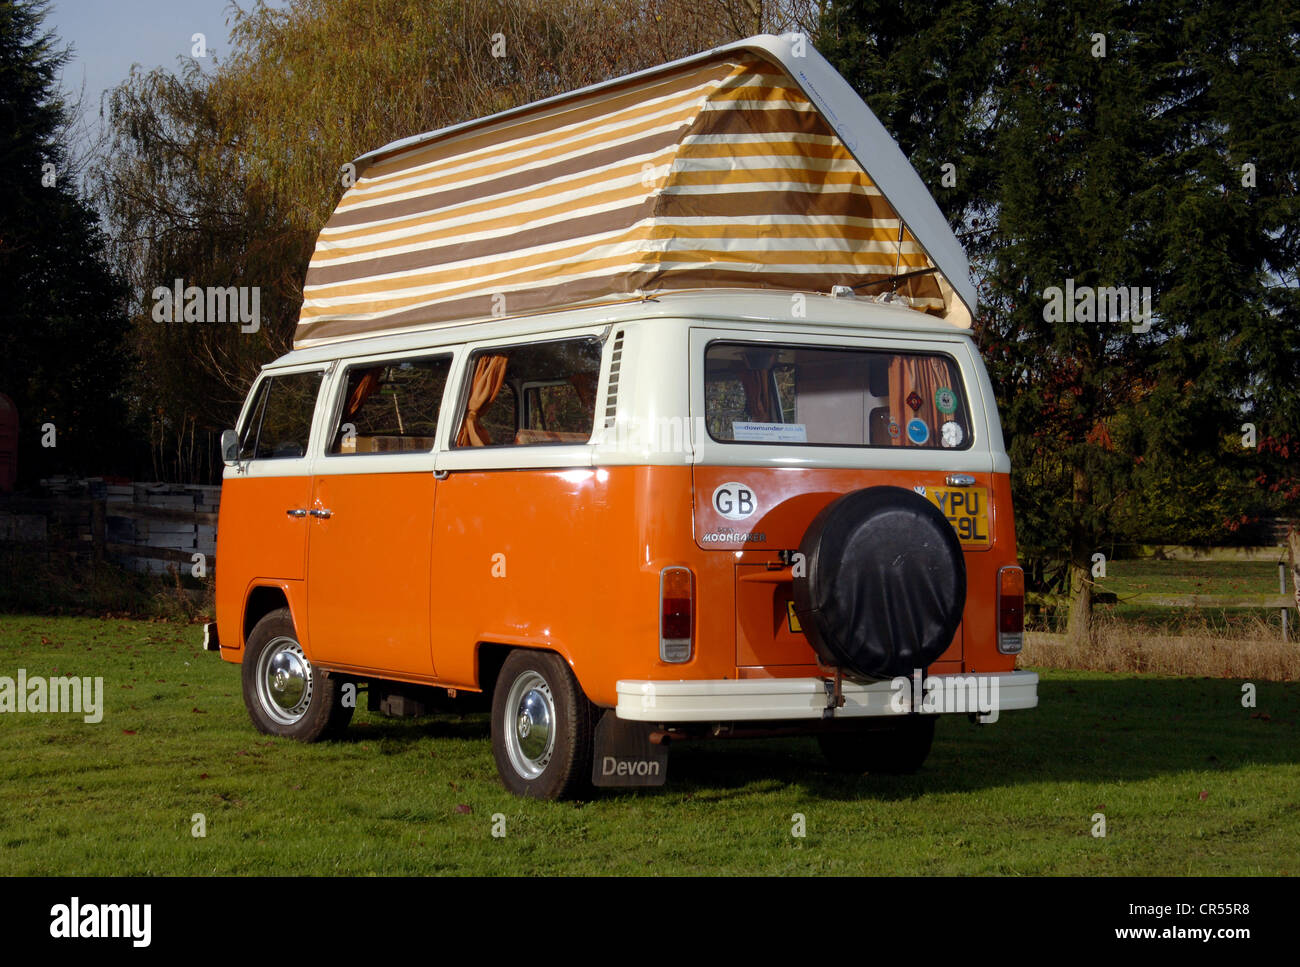 Pop Up Camper High Resolution Stock Photography and Images - Alamy